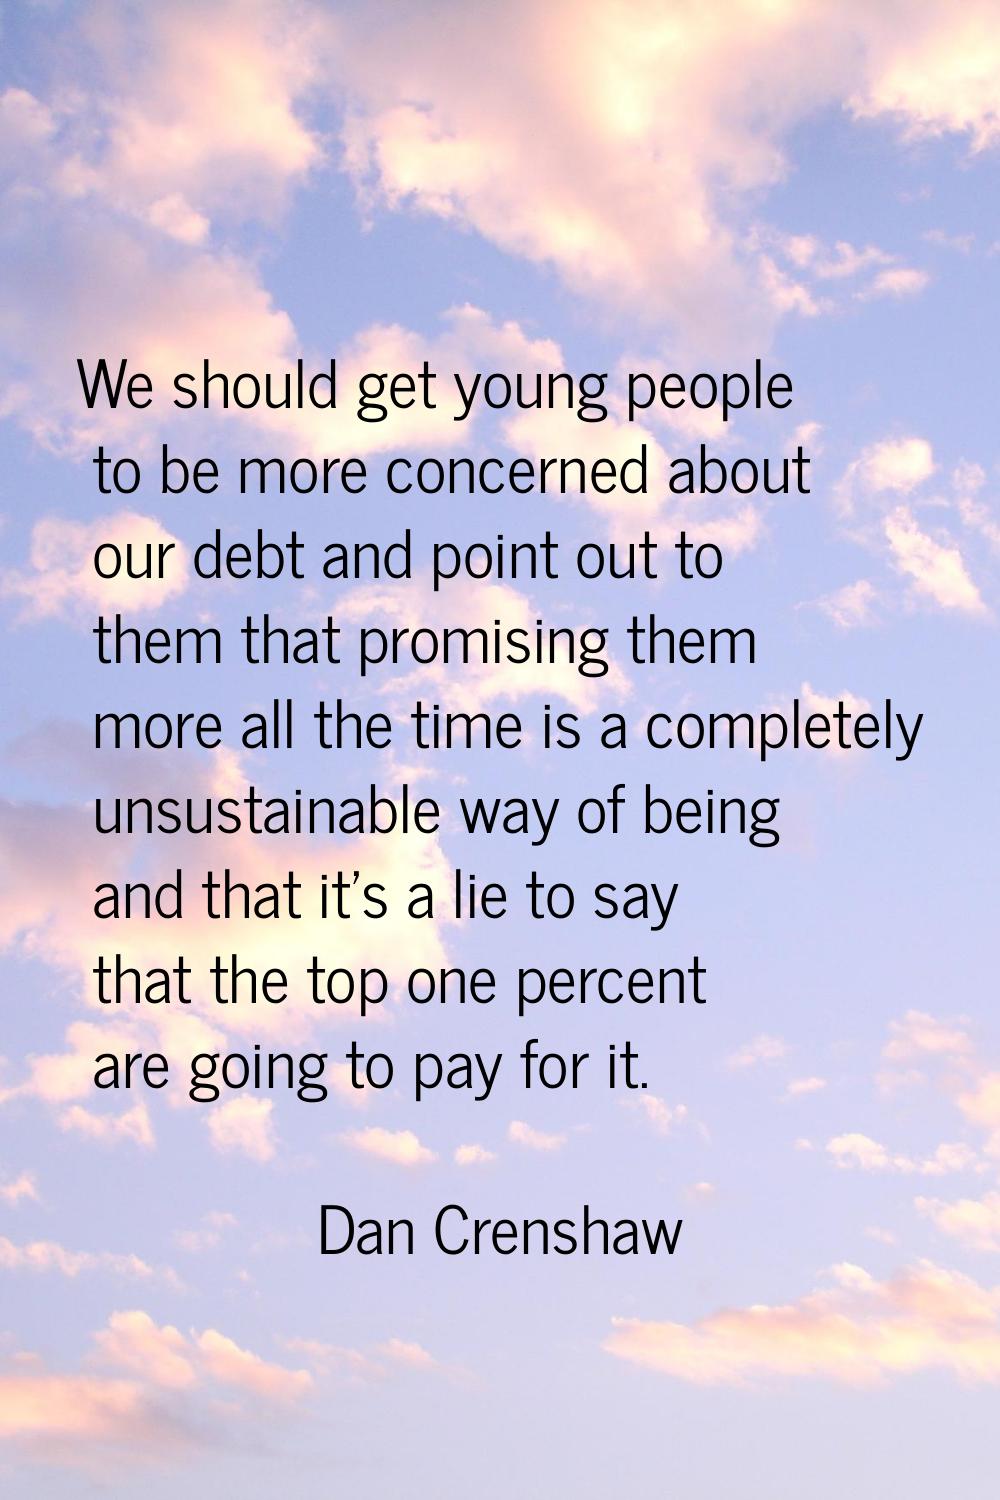 We should get young people to be more concerned about our debt and point out to them that promising